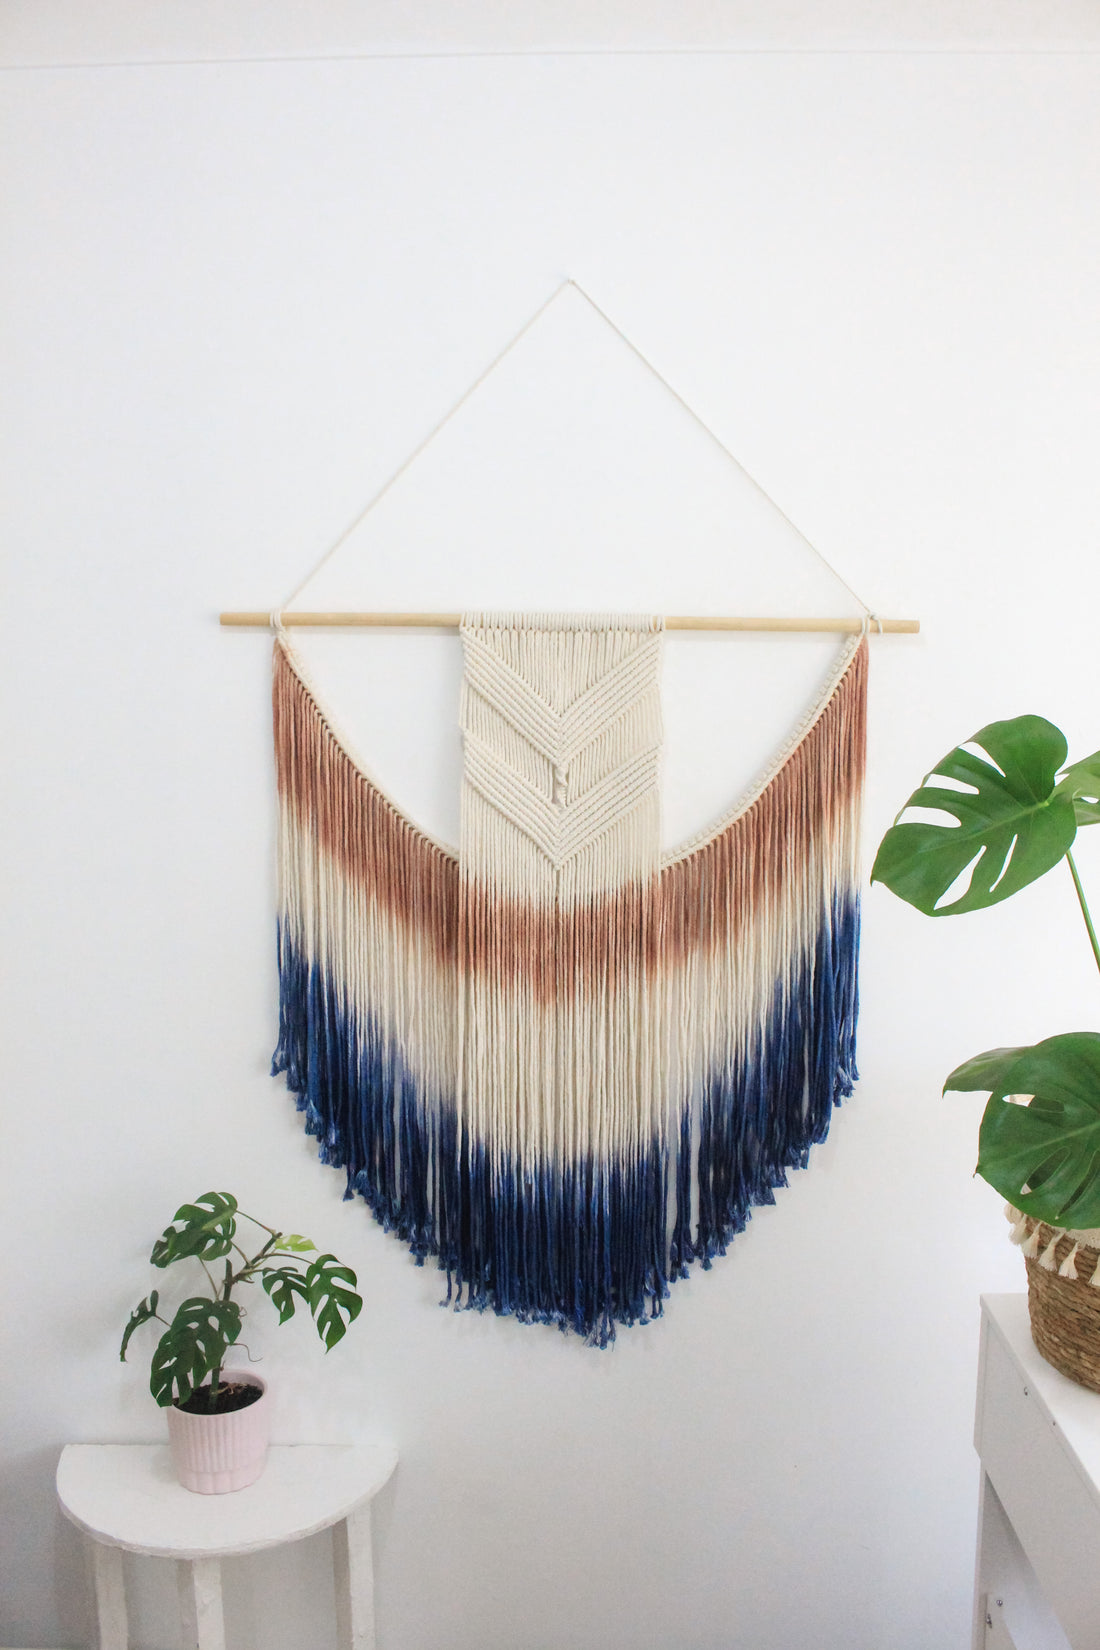 Sage & Twine, Blog post about Thoughtful Macrame Gift Ideas for Birthdays.